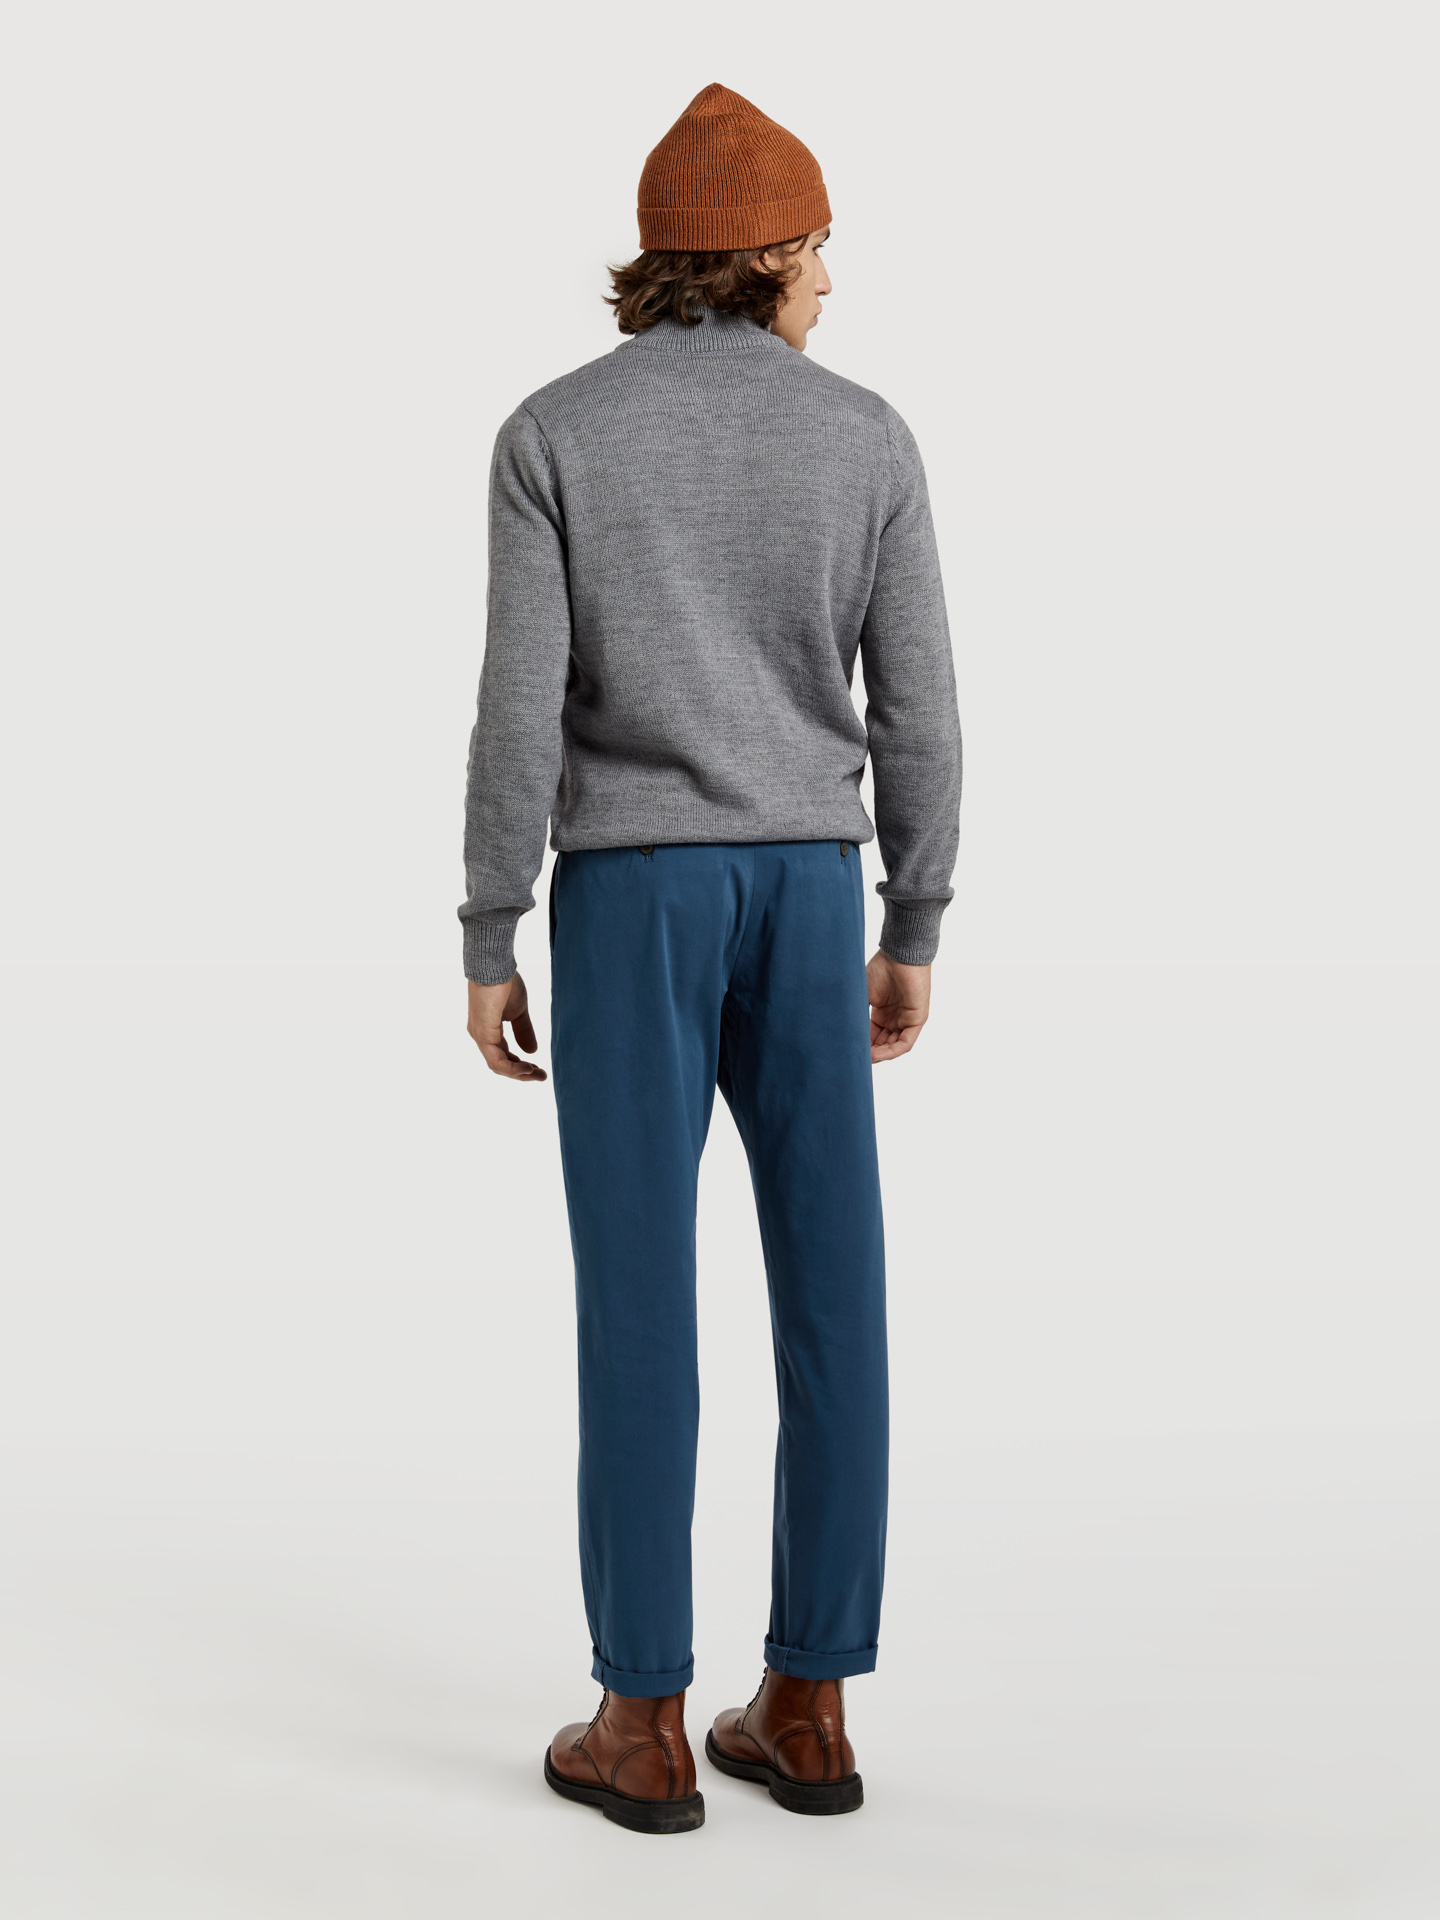 Chino Trousers Teal Sport Man